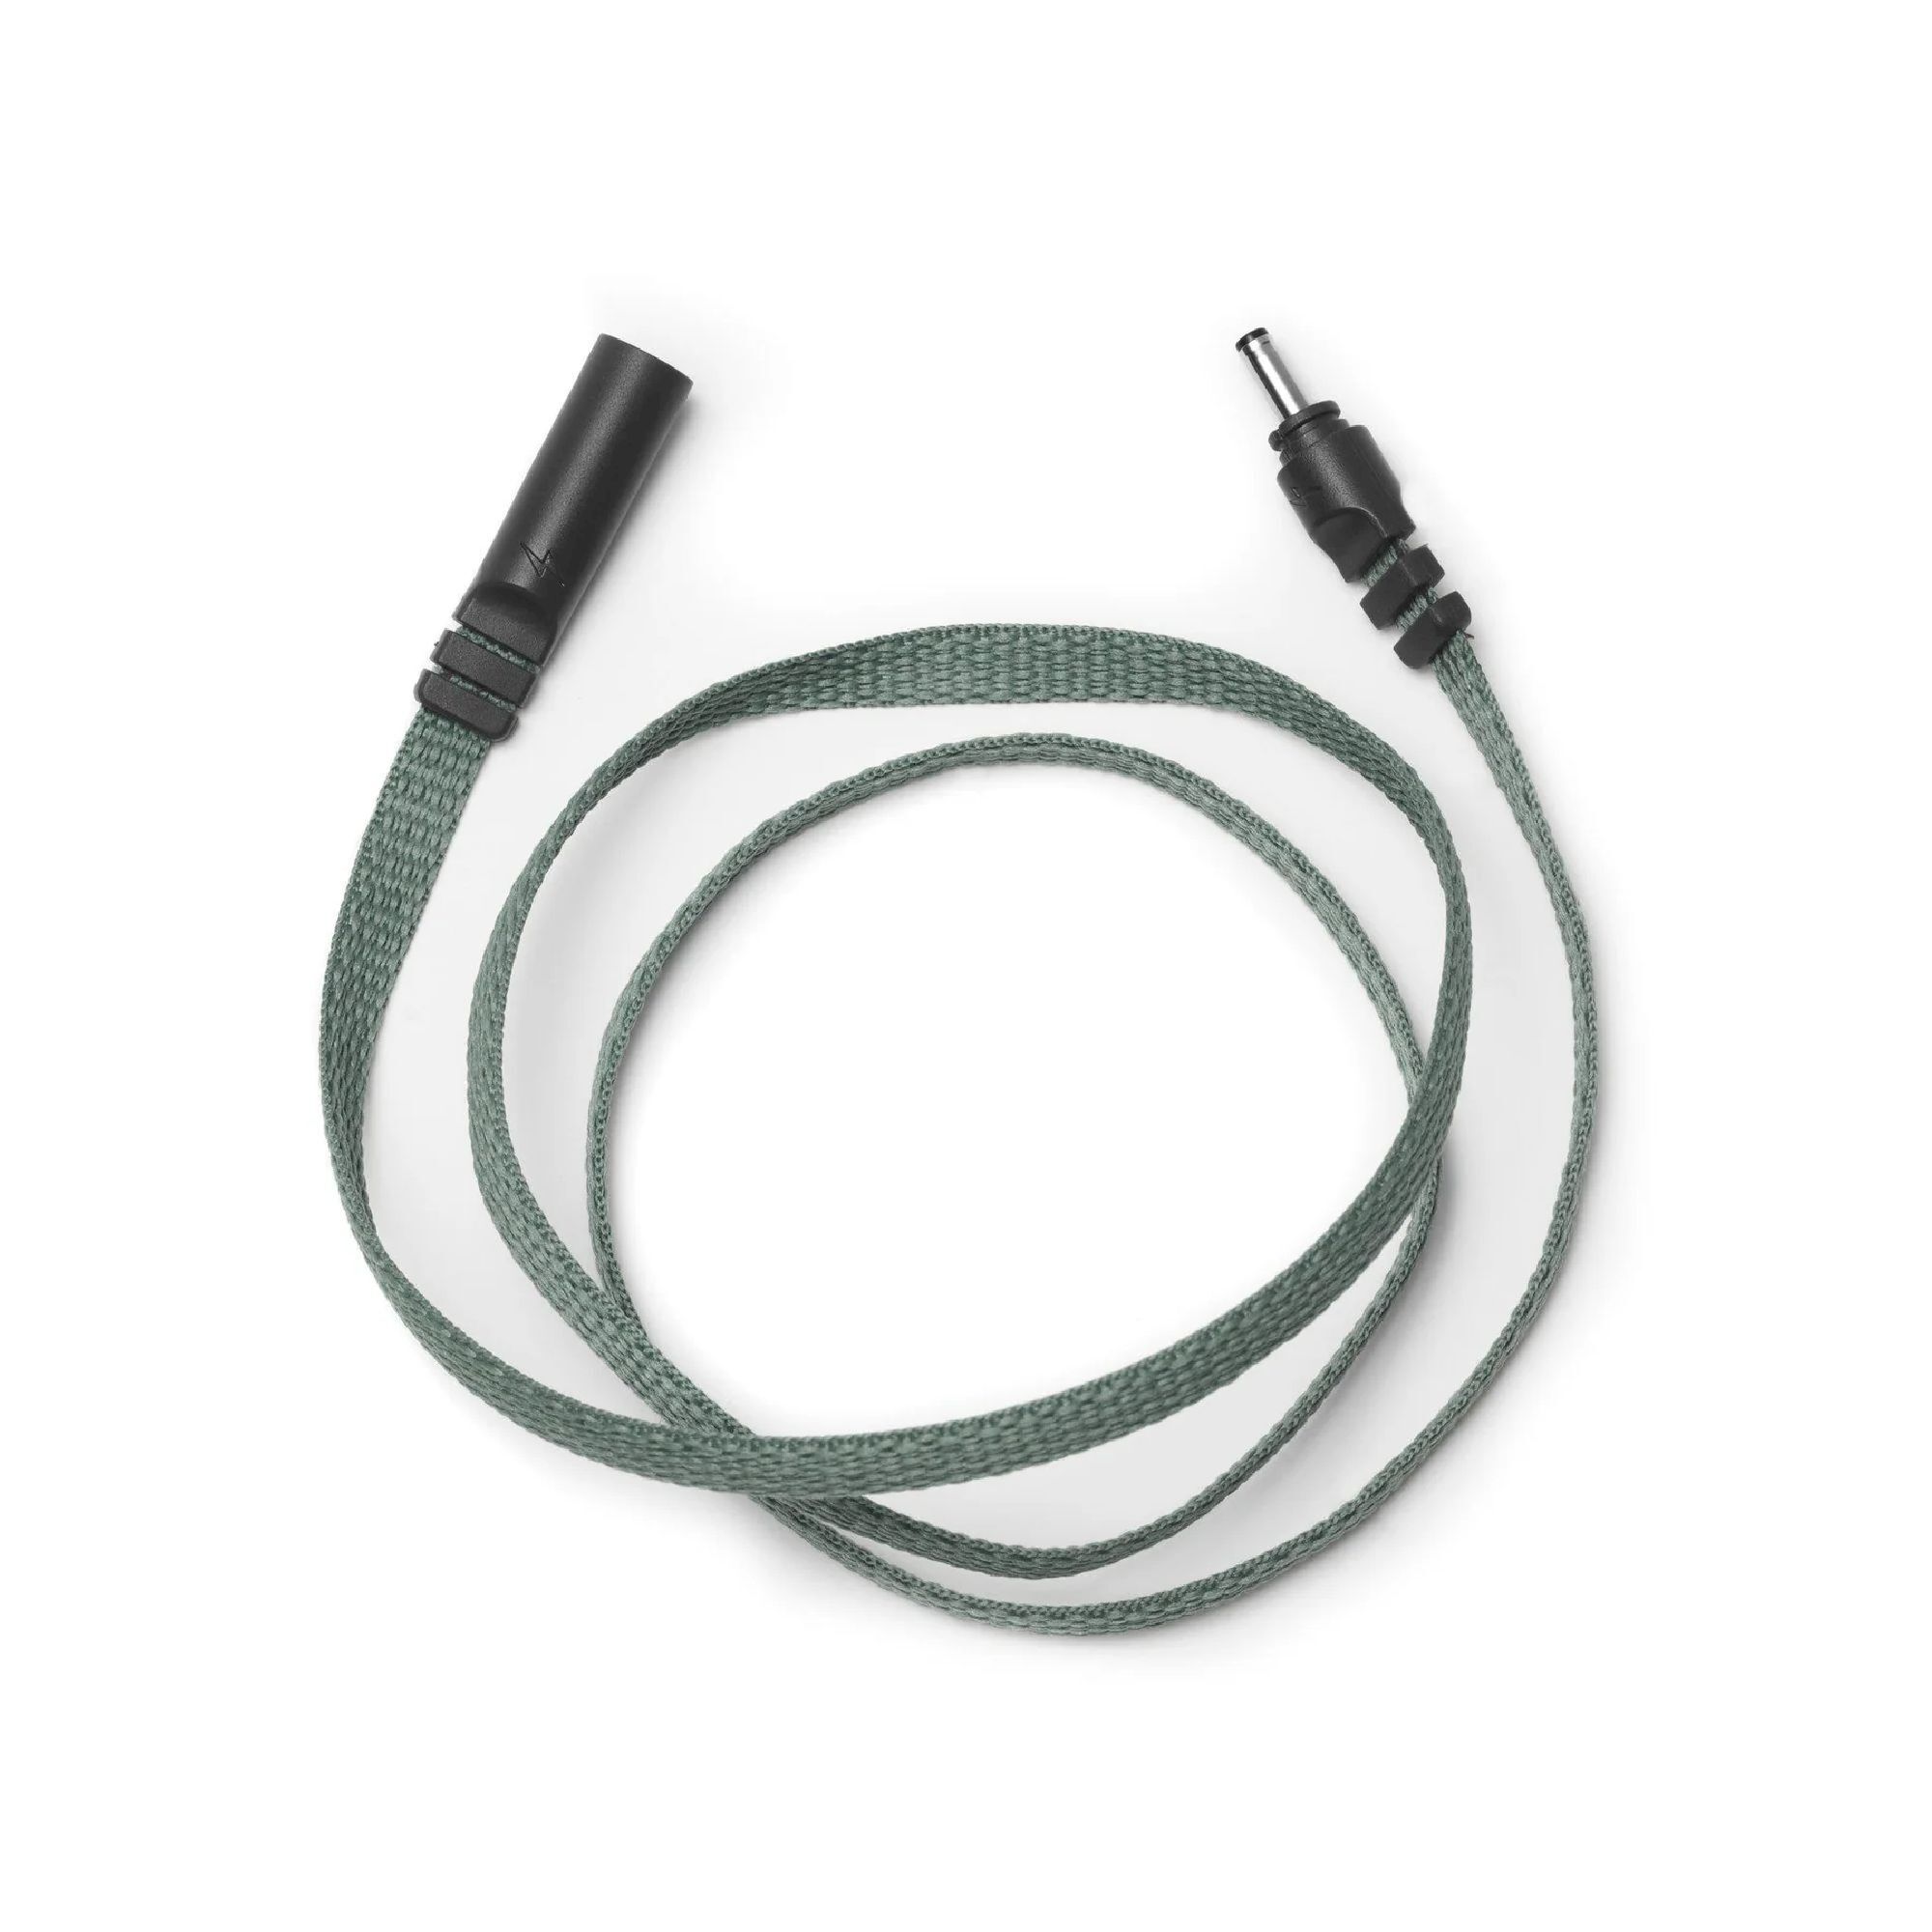 Silva Trail Runner Free 2 Extension Cable - Pannlampa | Hardloop